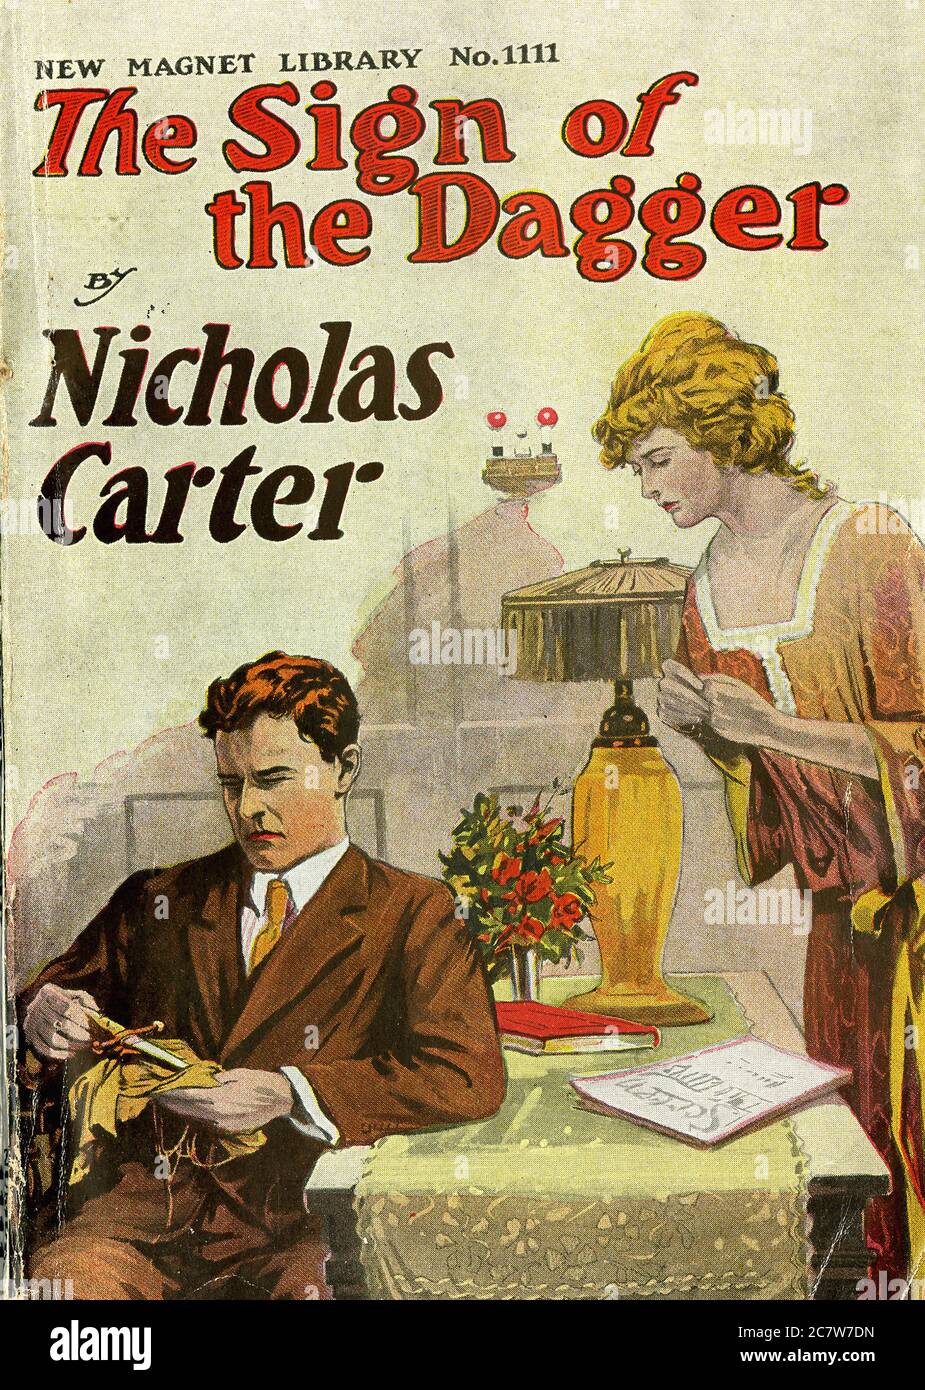 Nicholas Carter - The Sign of the Dagger - New Magnet Library - Vintage Pulp Literary Stock Photo